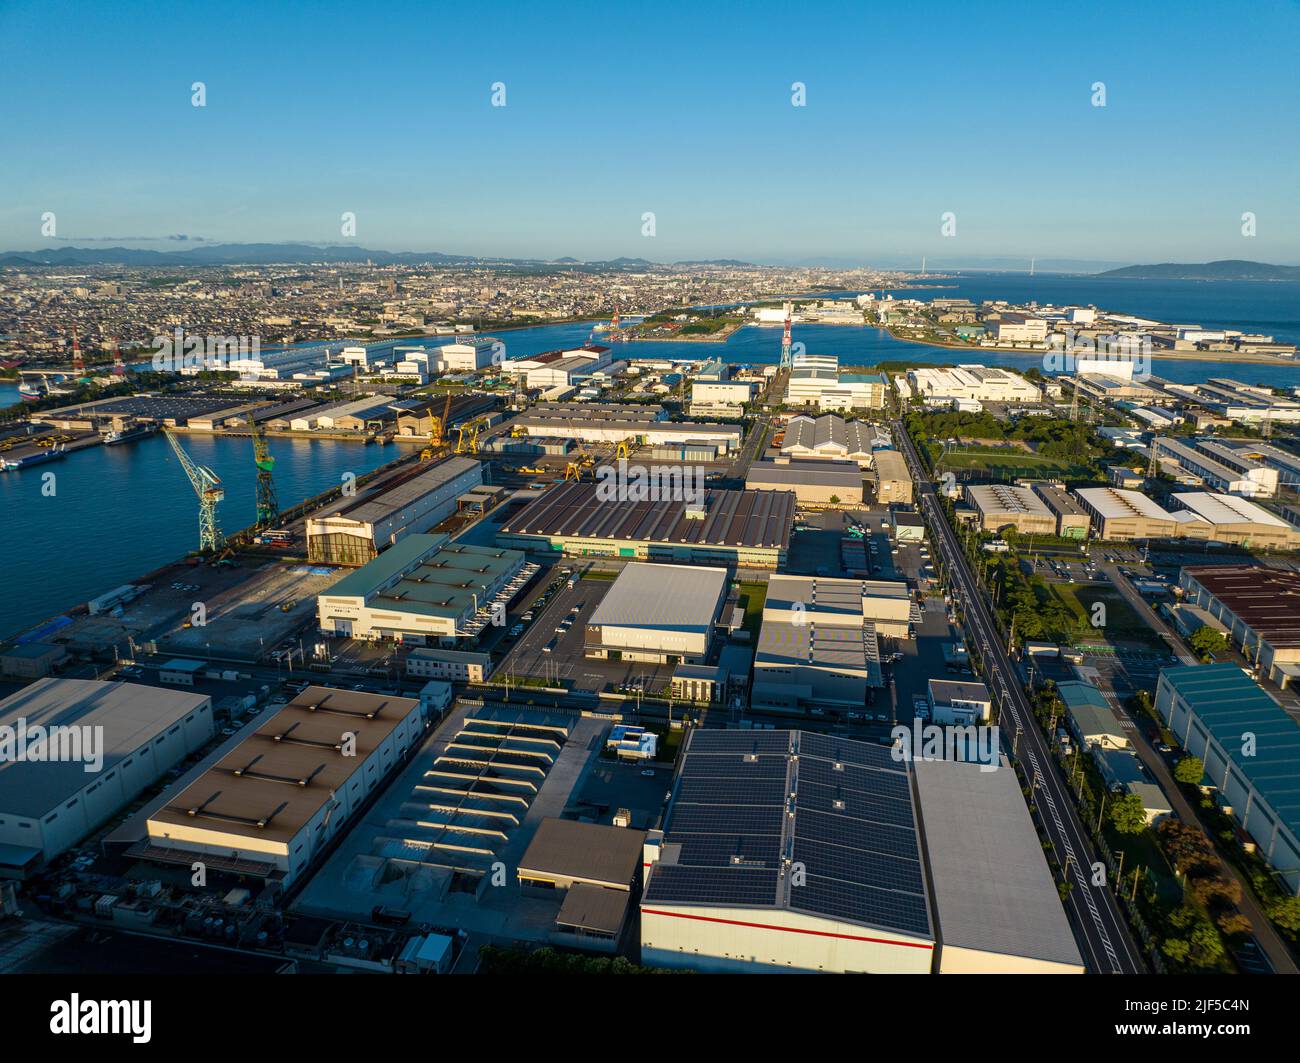 Aerial view of large cargo warehouses on manmade industrial island  Stock Photo